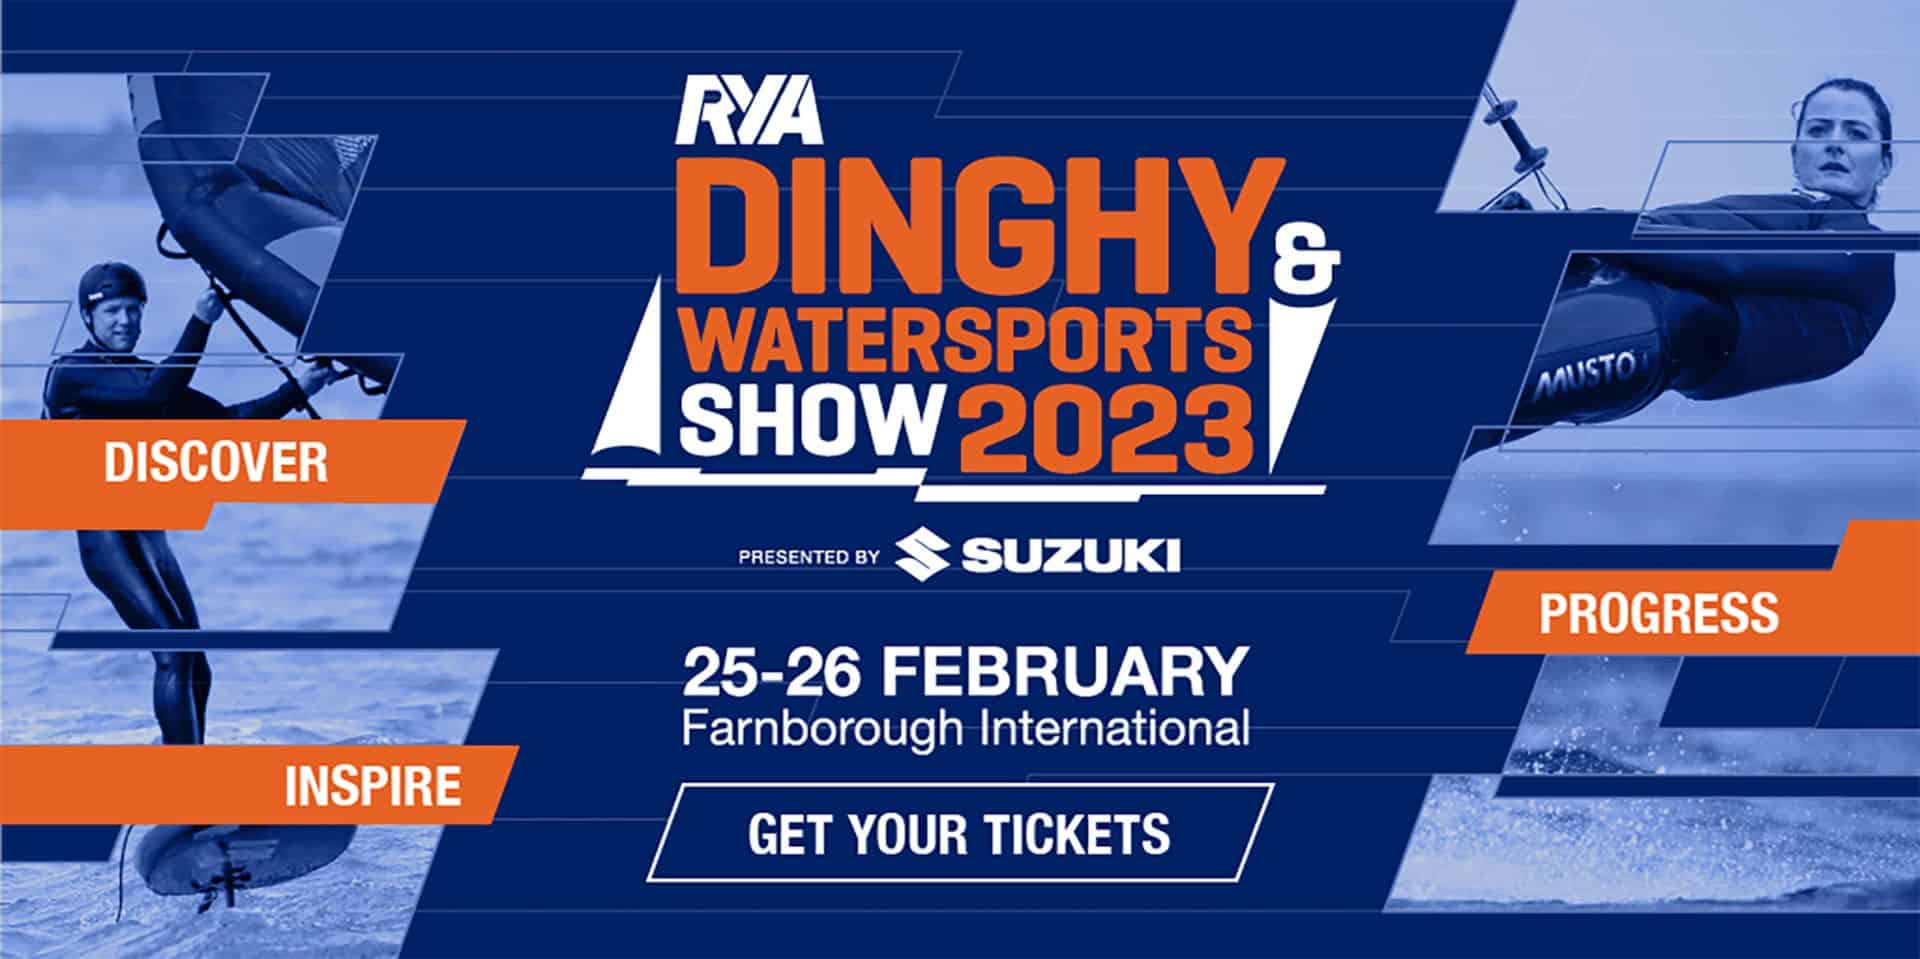 RYA Dinghy and Watersports Show